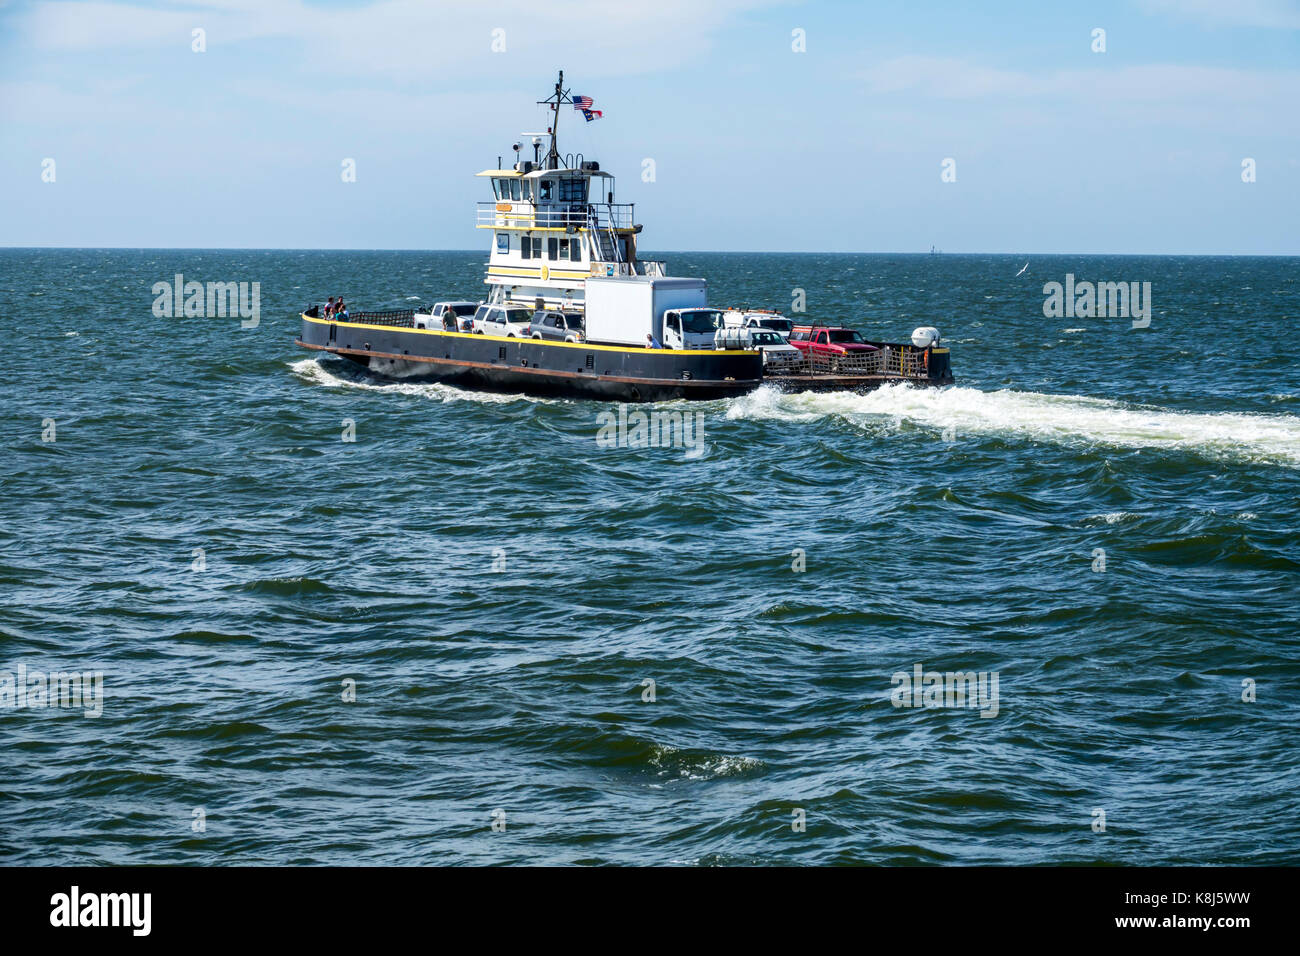 North Carolina,NC,Outer Banks,Pamlico Sound,Ocracoke Island,Hatteras,ferry,water,navigating,vehicles,waves,NC170518138 Stock Photo